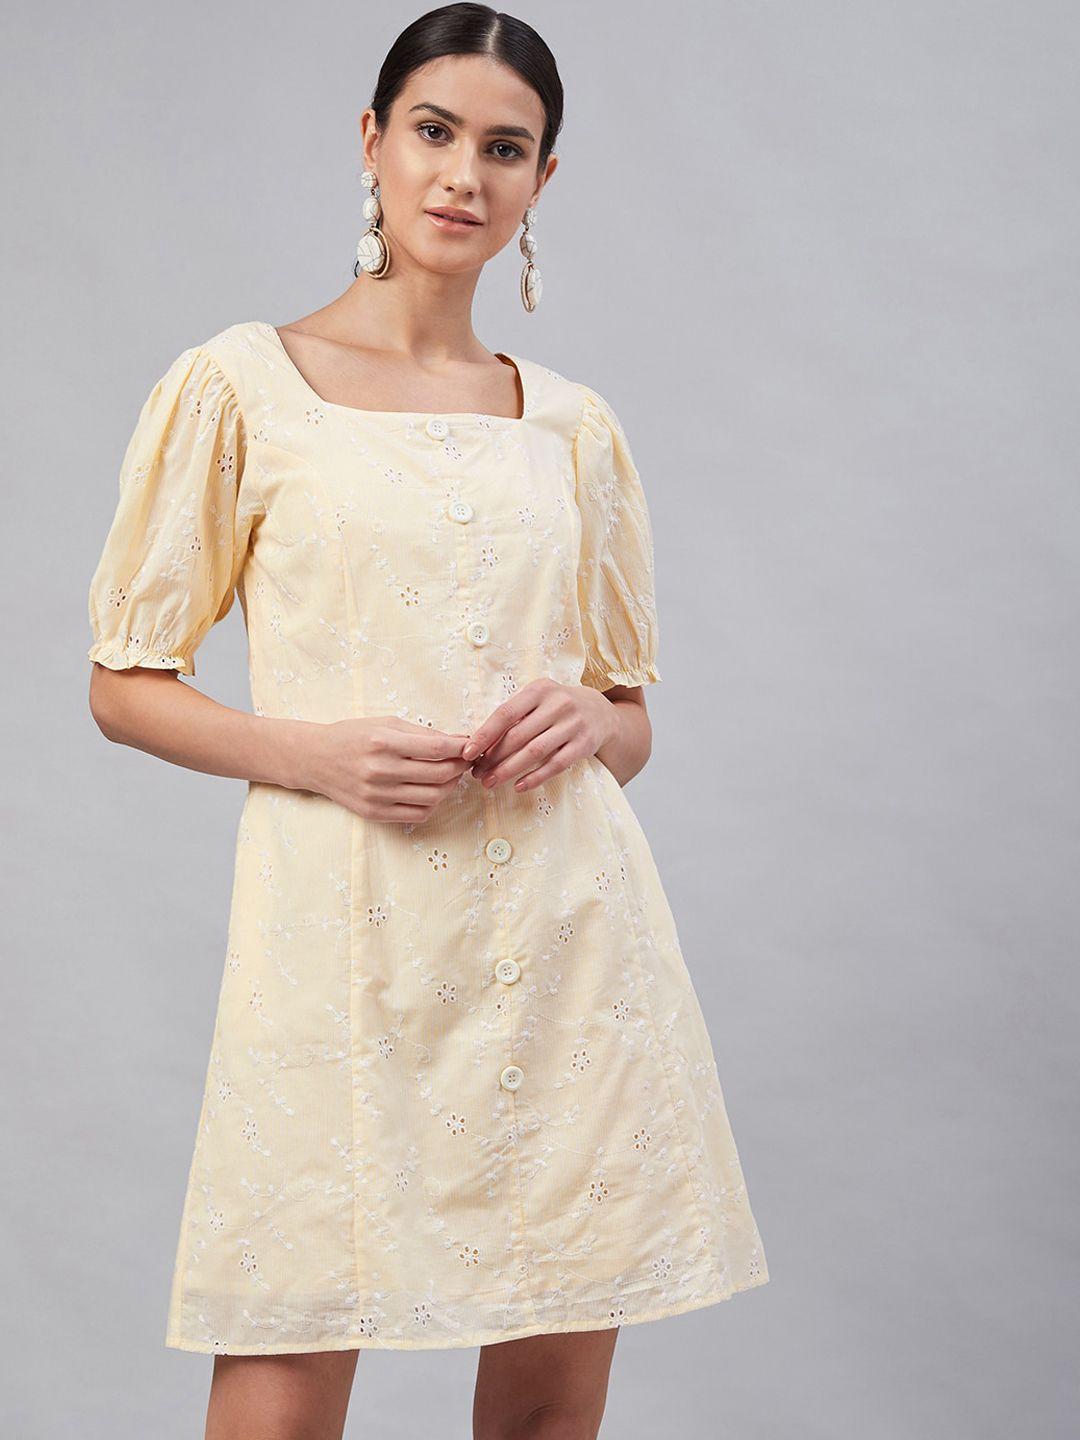 marie-claire-women-yellow-schiffli-embroidered-a-line-dress